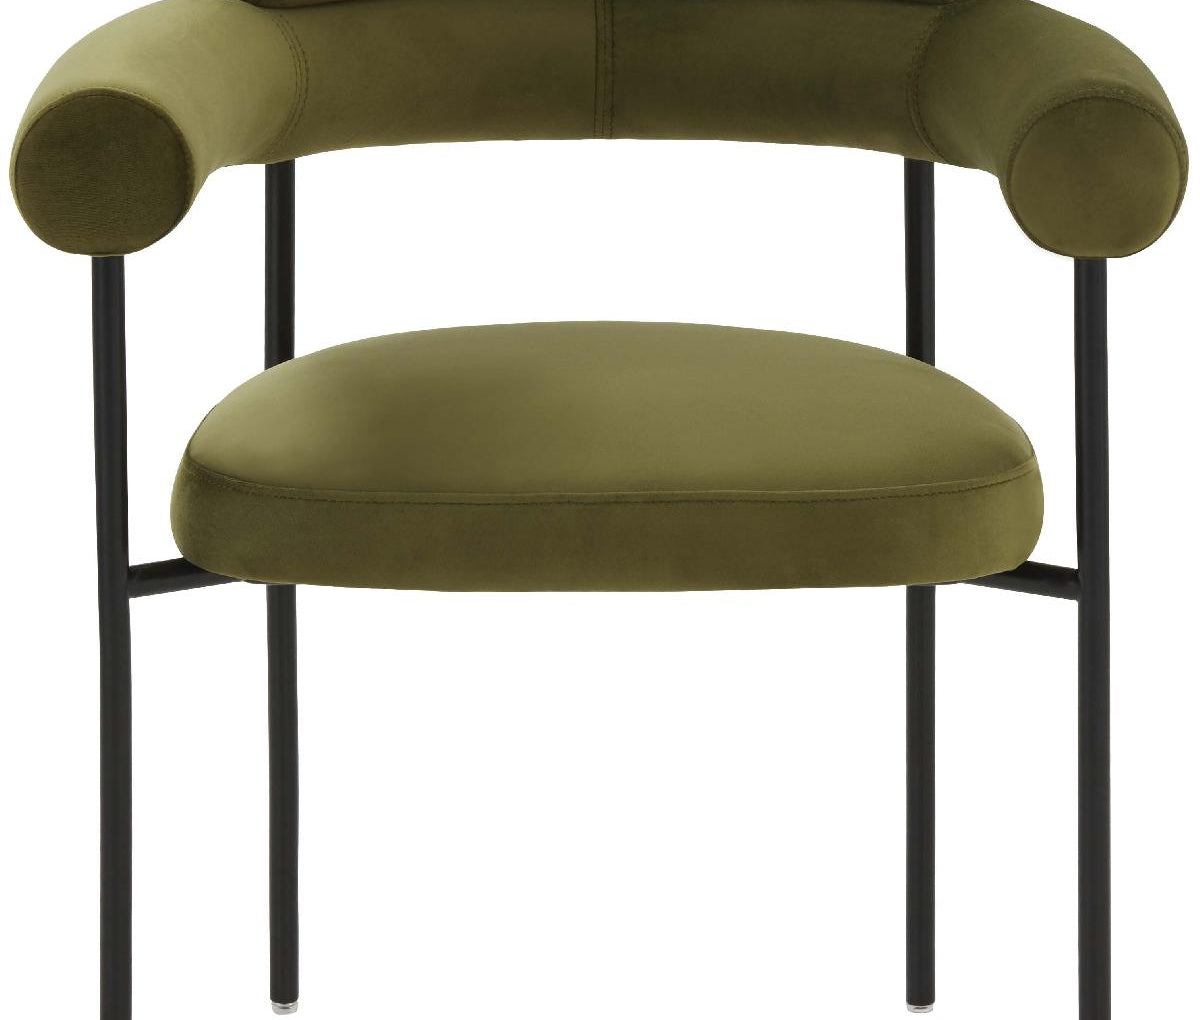 Safavieh Couture Jaslene Curved Back Dining Chair - Olive Green / Black